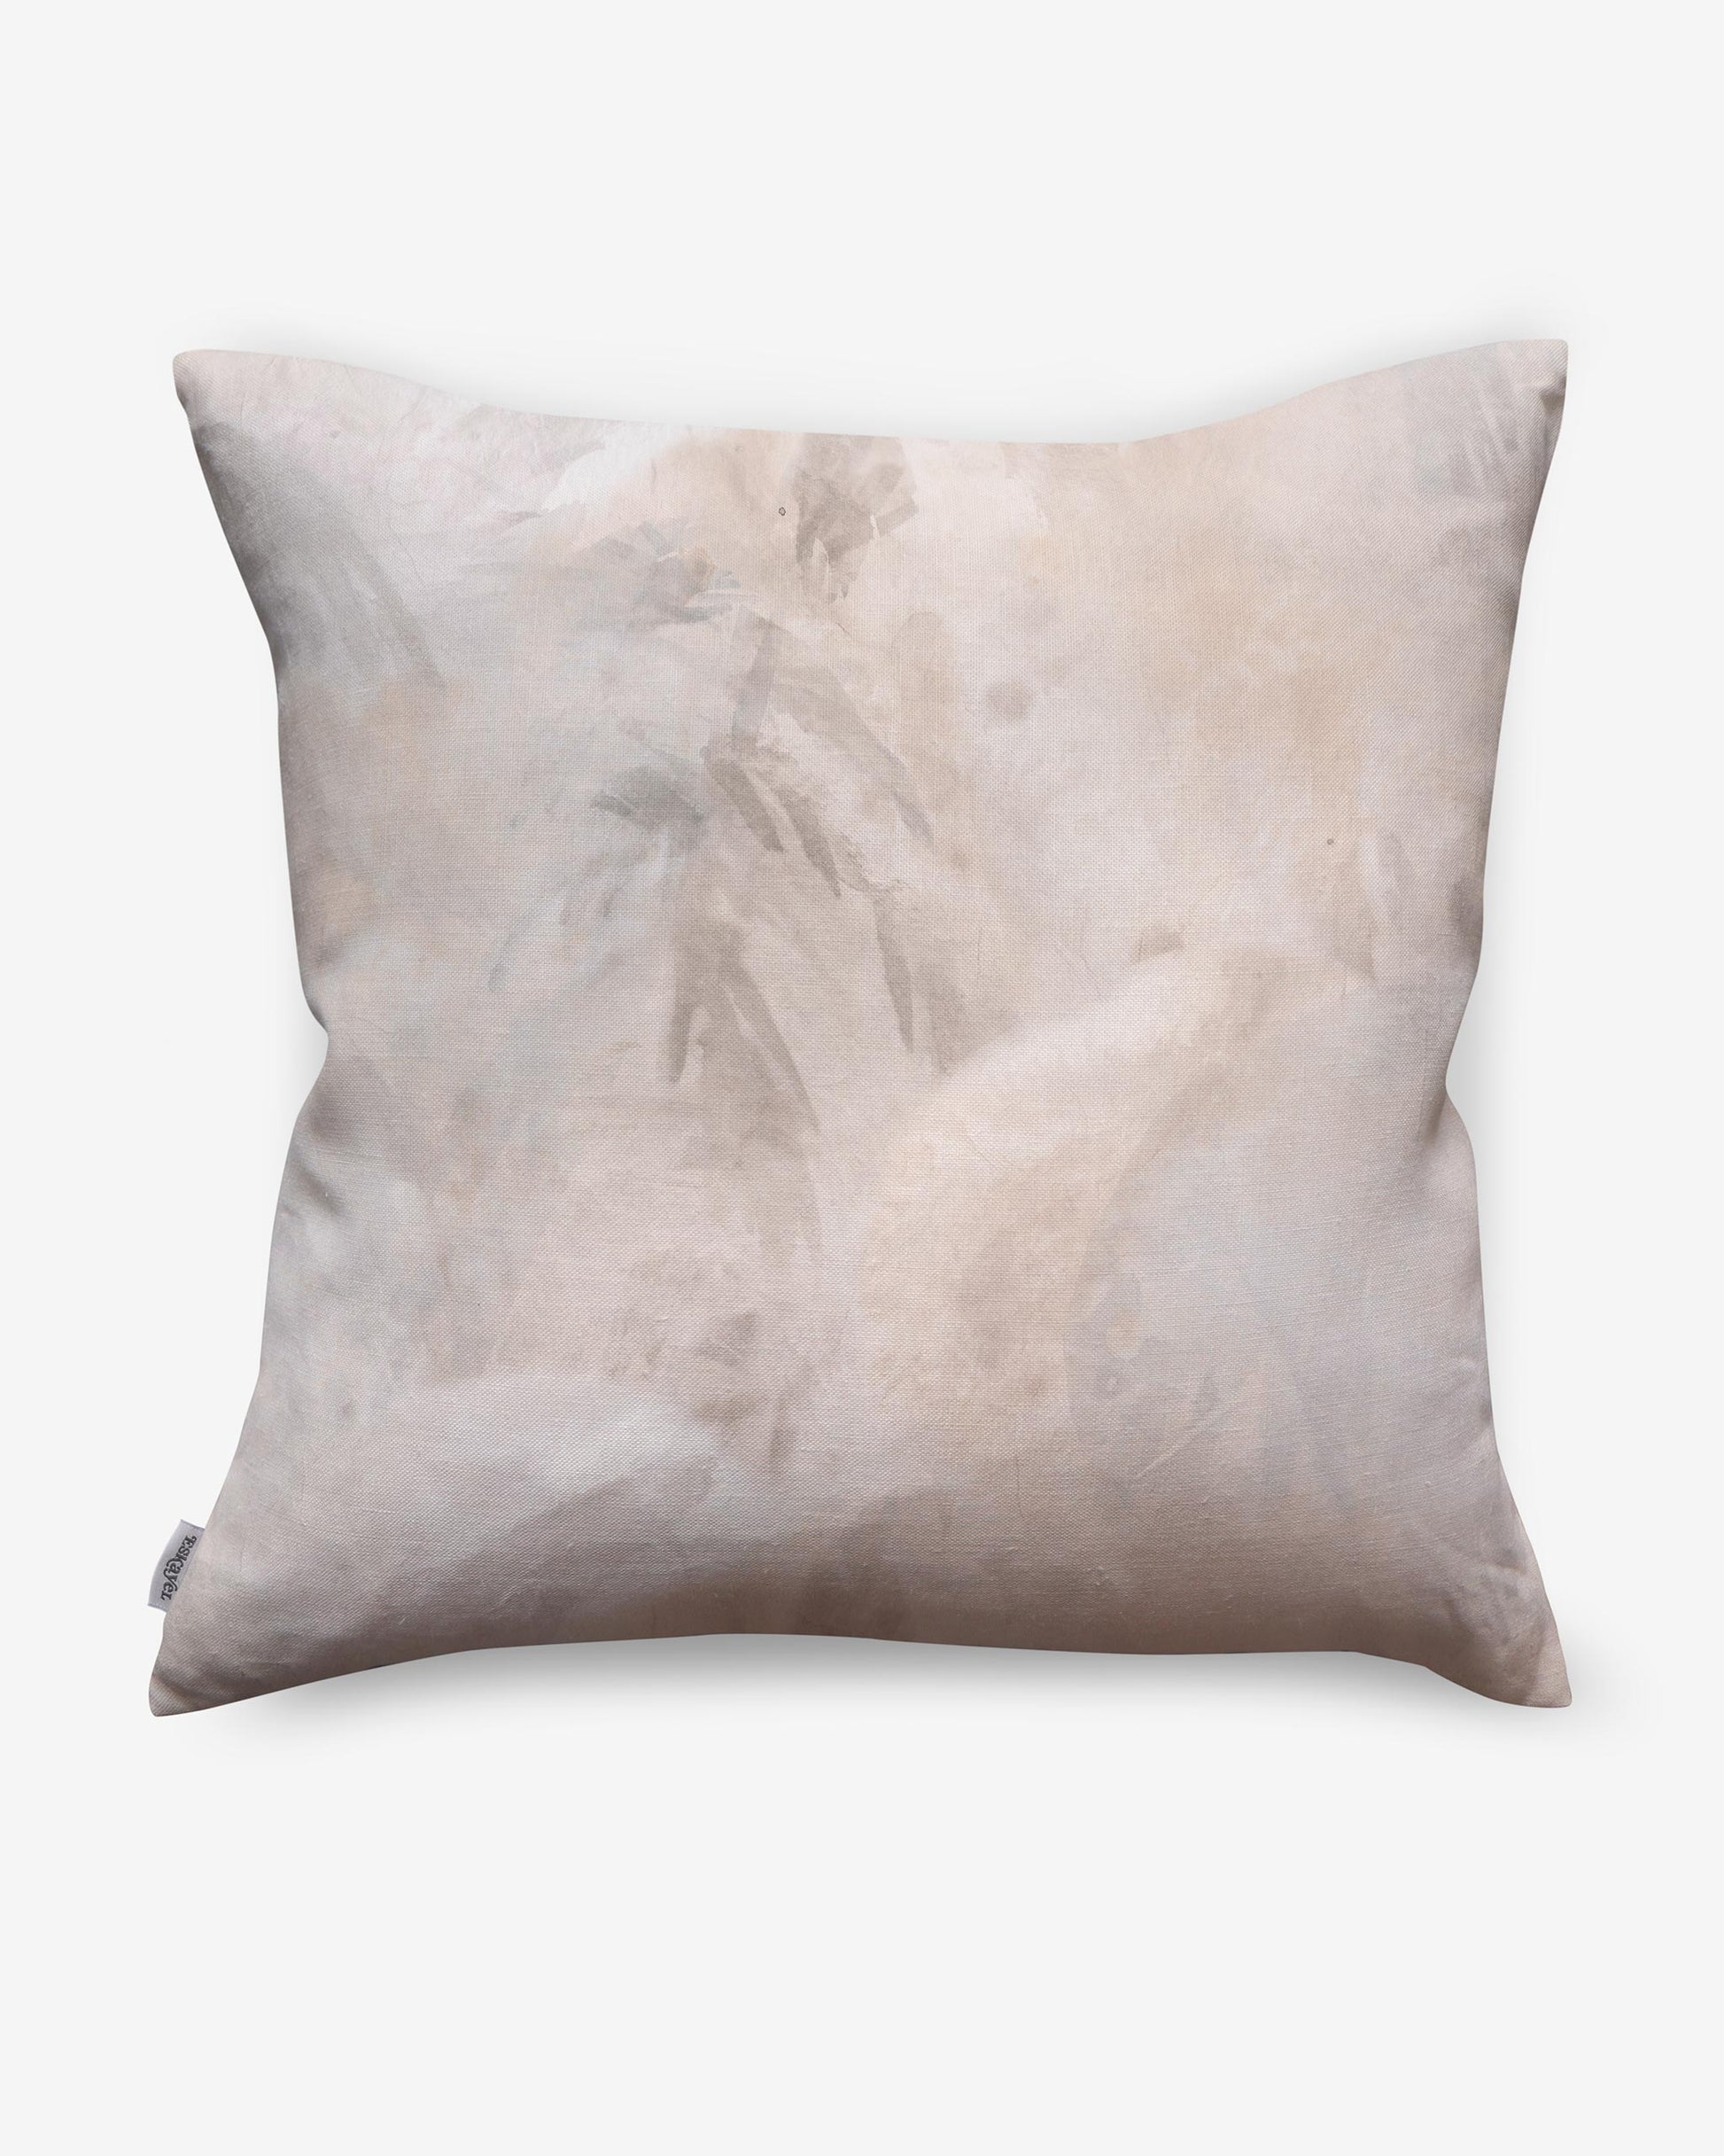 A Palmeti Pillow Luminosa with a white and peachy pink fabric pattern on it